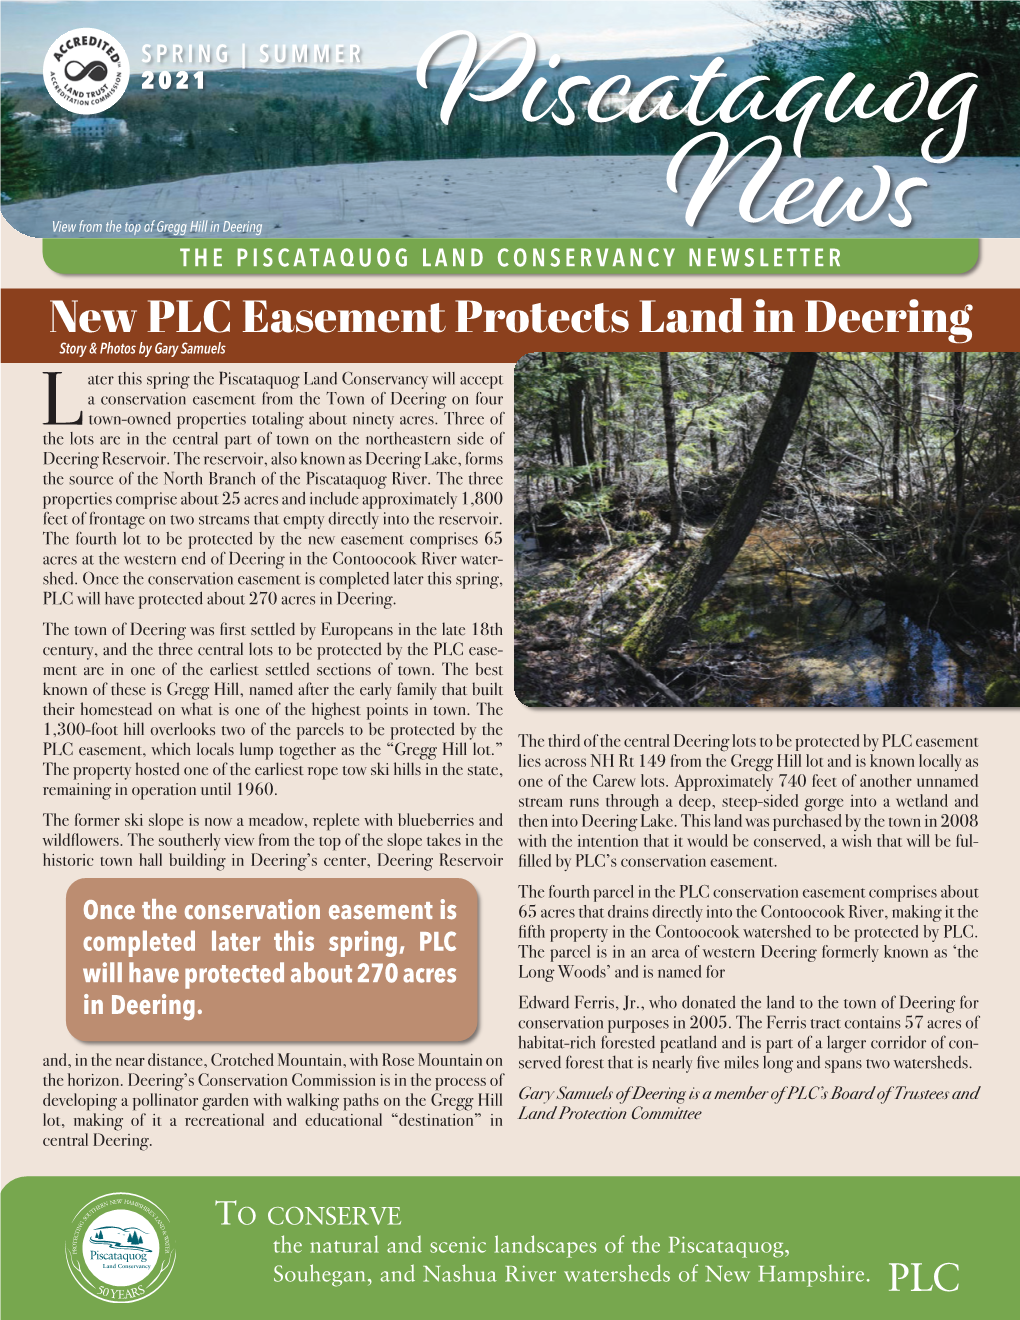 New PLC Easement Protects Land in Deering